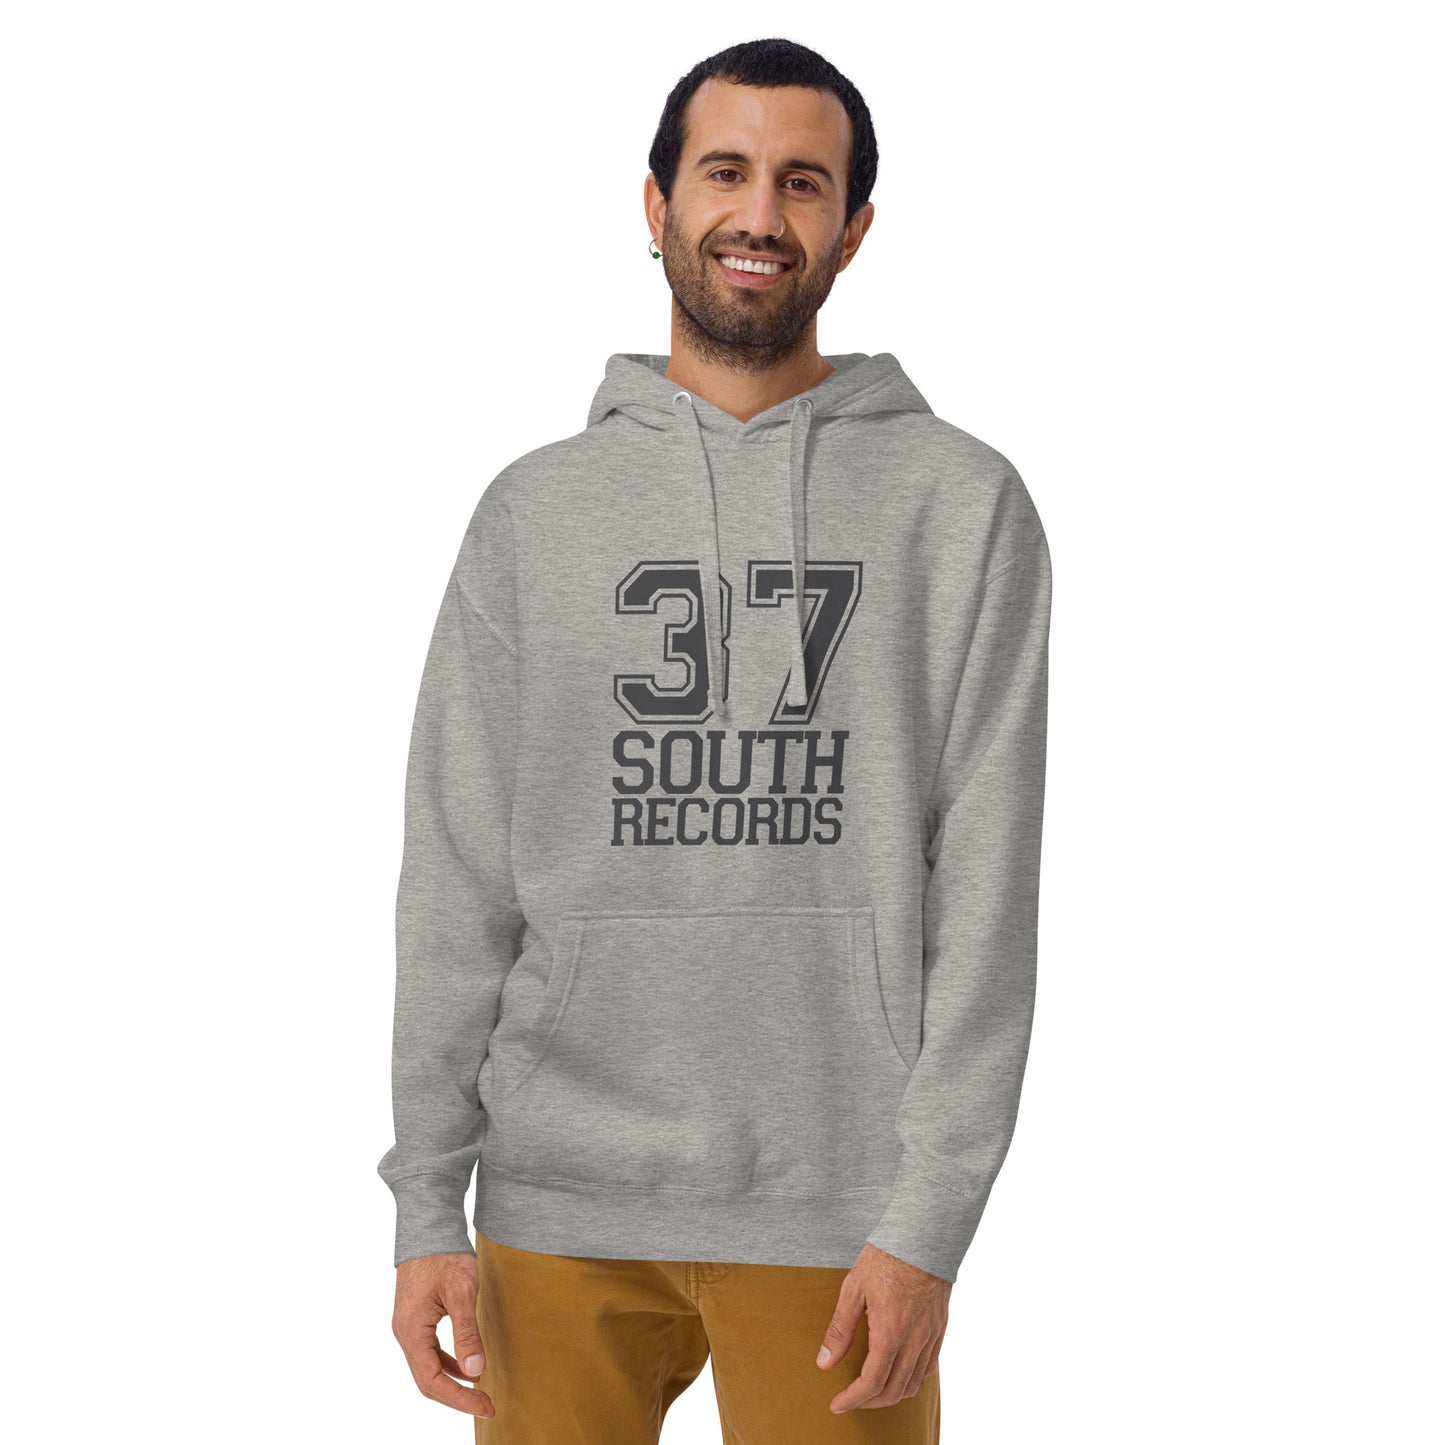 37 South Records Unisex Hoodie